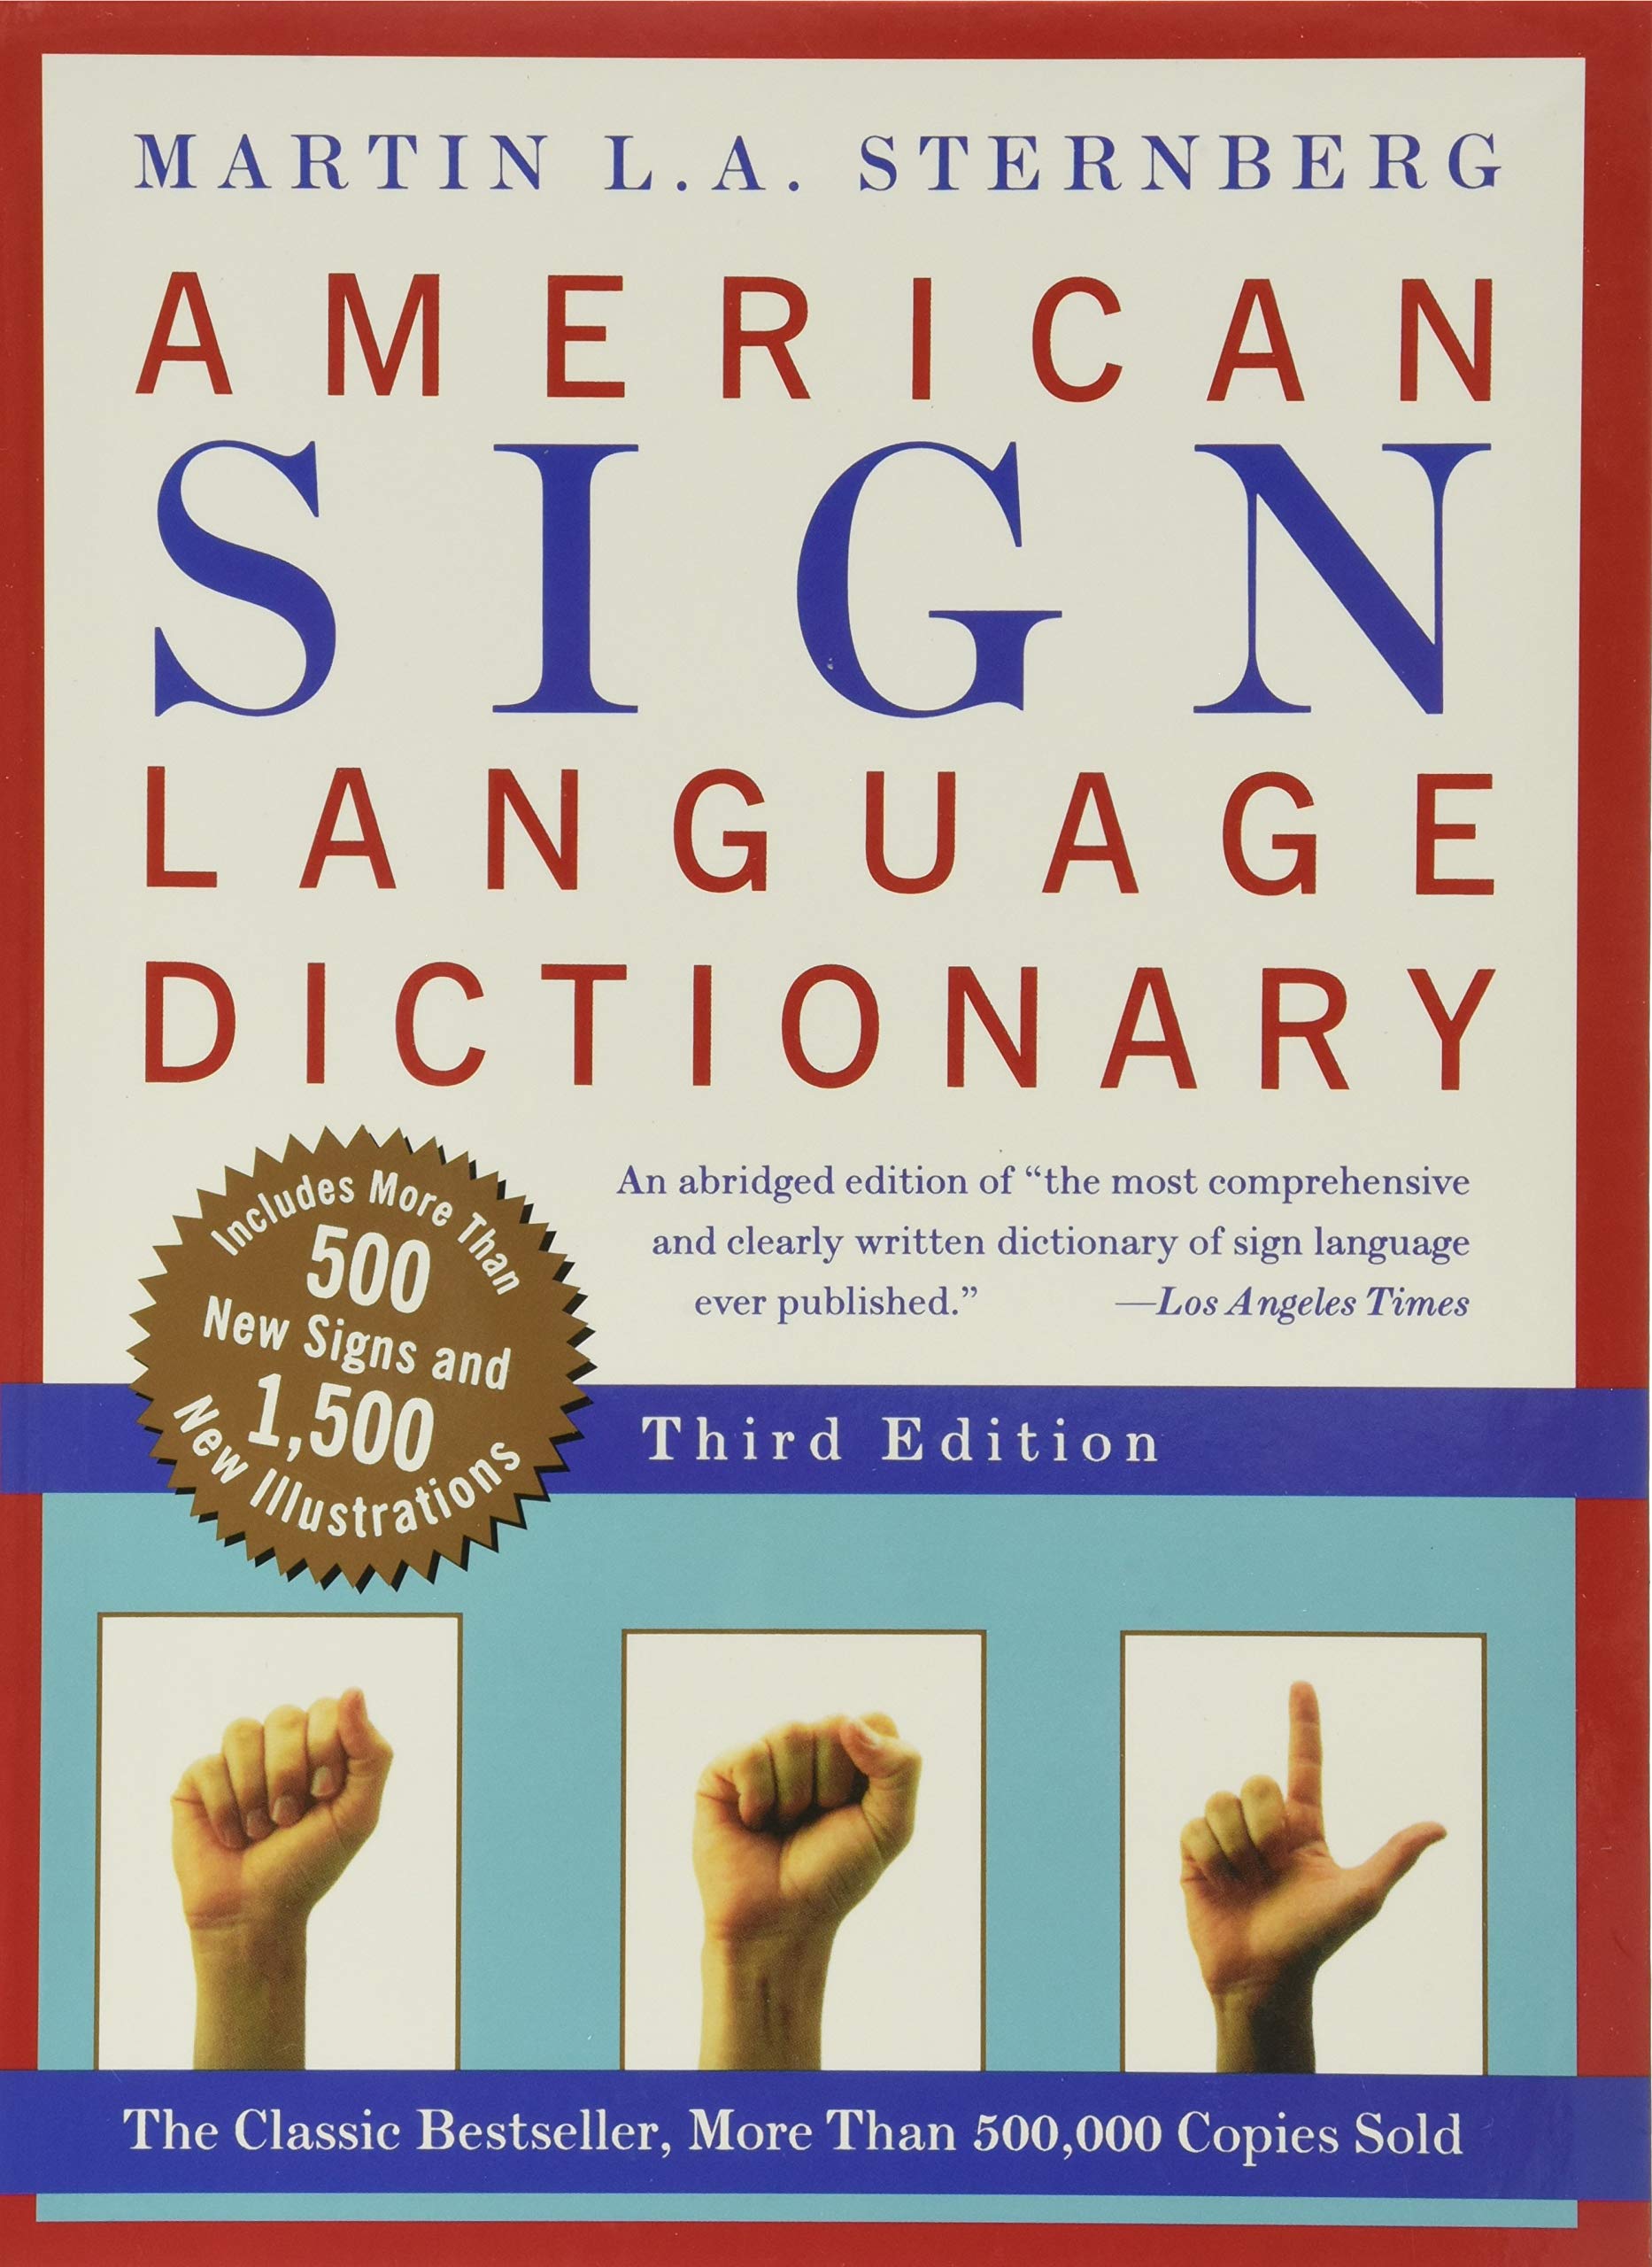 American Sign Language Dictionary Council For The Deaf And Hard Of Hearing